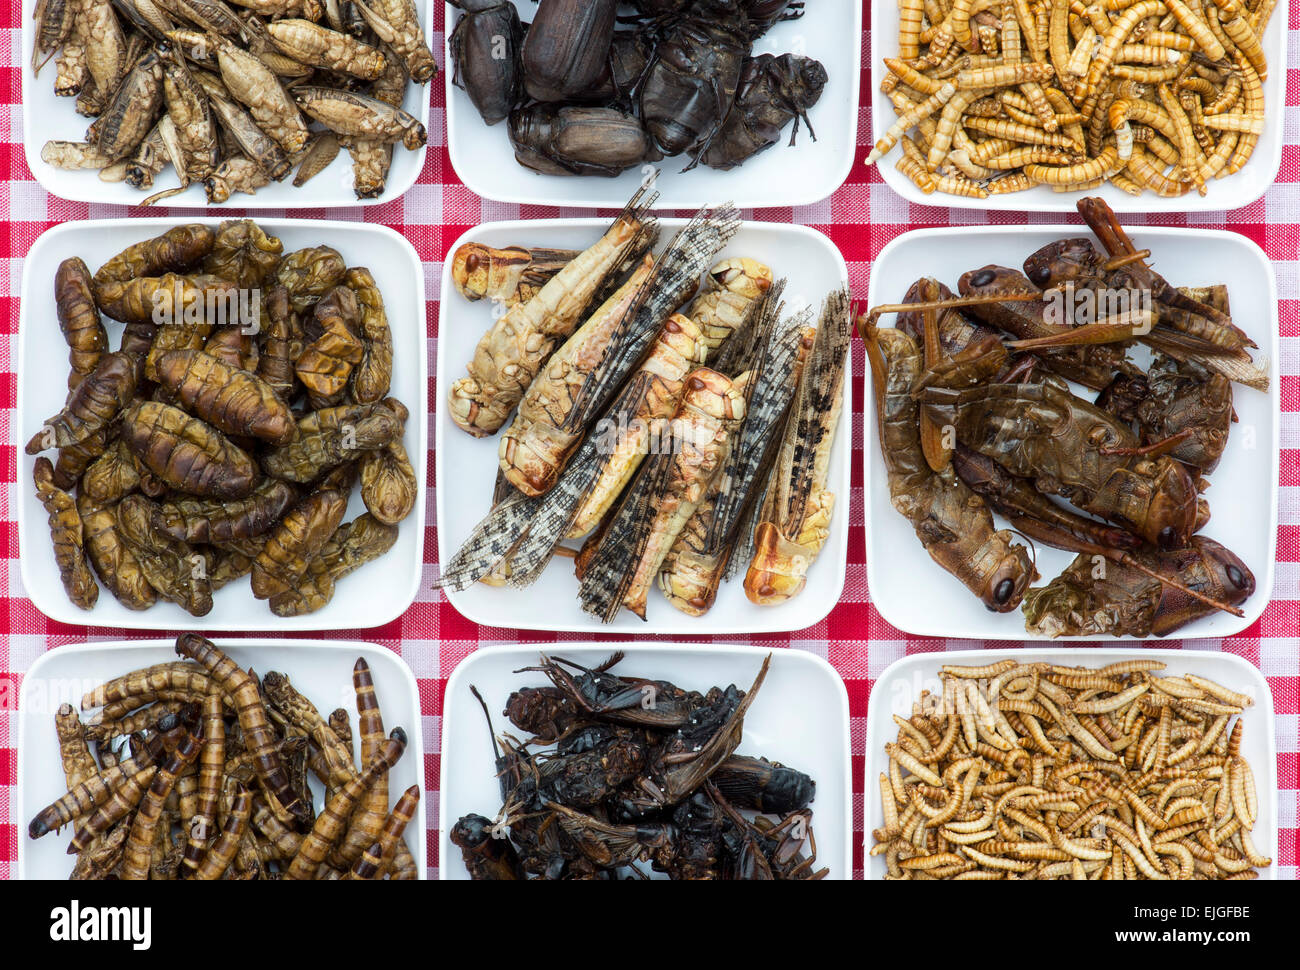 Edible insects. Grasshoppers, Buffalo Worms, Crickets, Mealworms, Beetles and Locusts. Food of the future Stock Photo